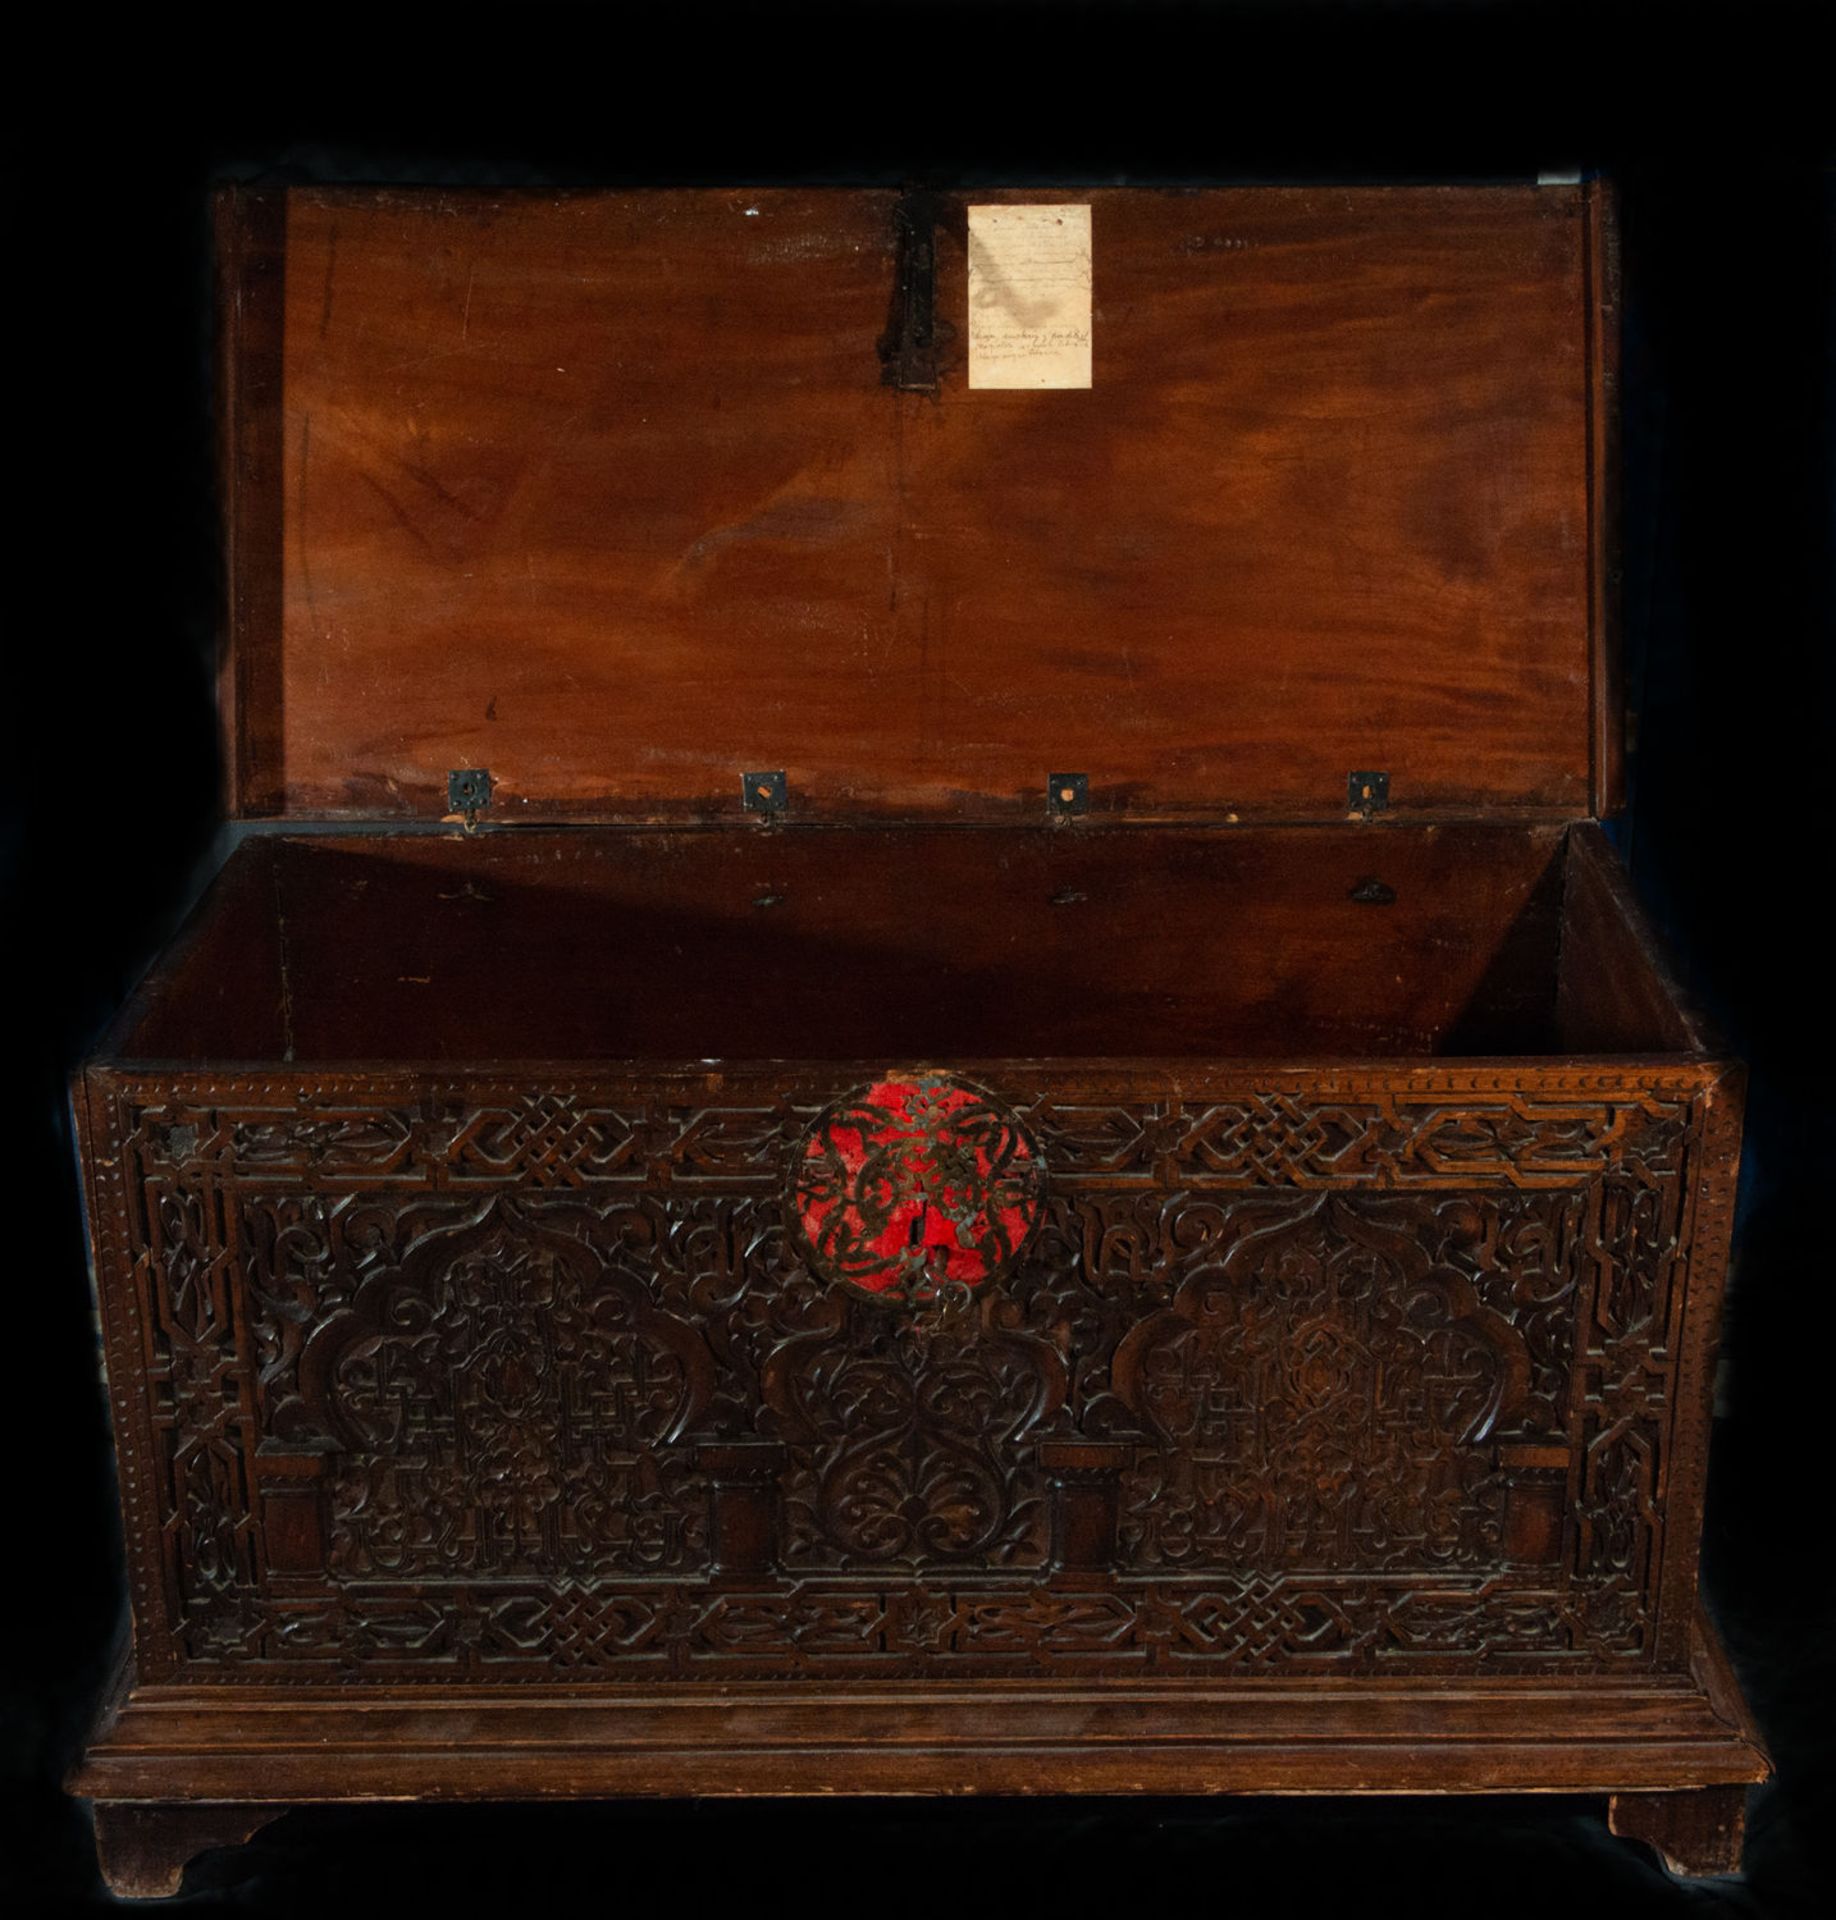 Nasrid style chest in cedar wood, Granada, 17th - 18th centuries - Image 7 of 12